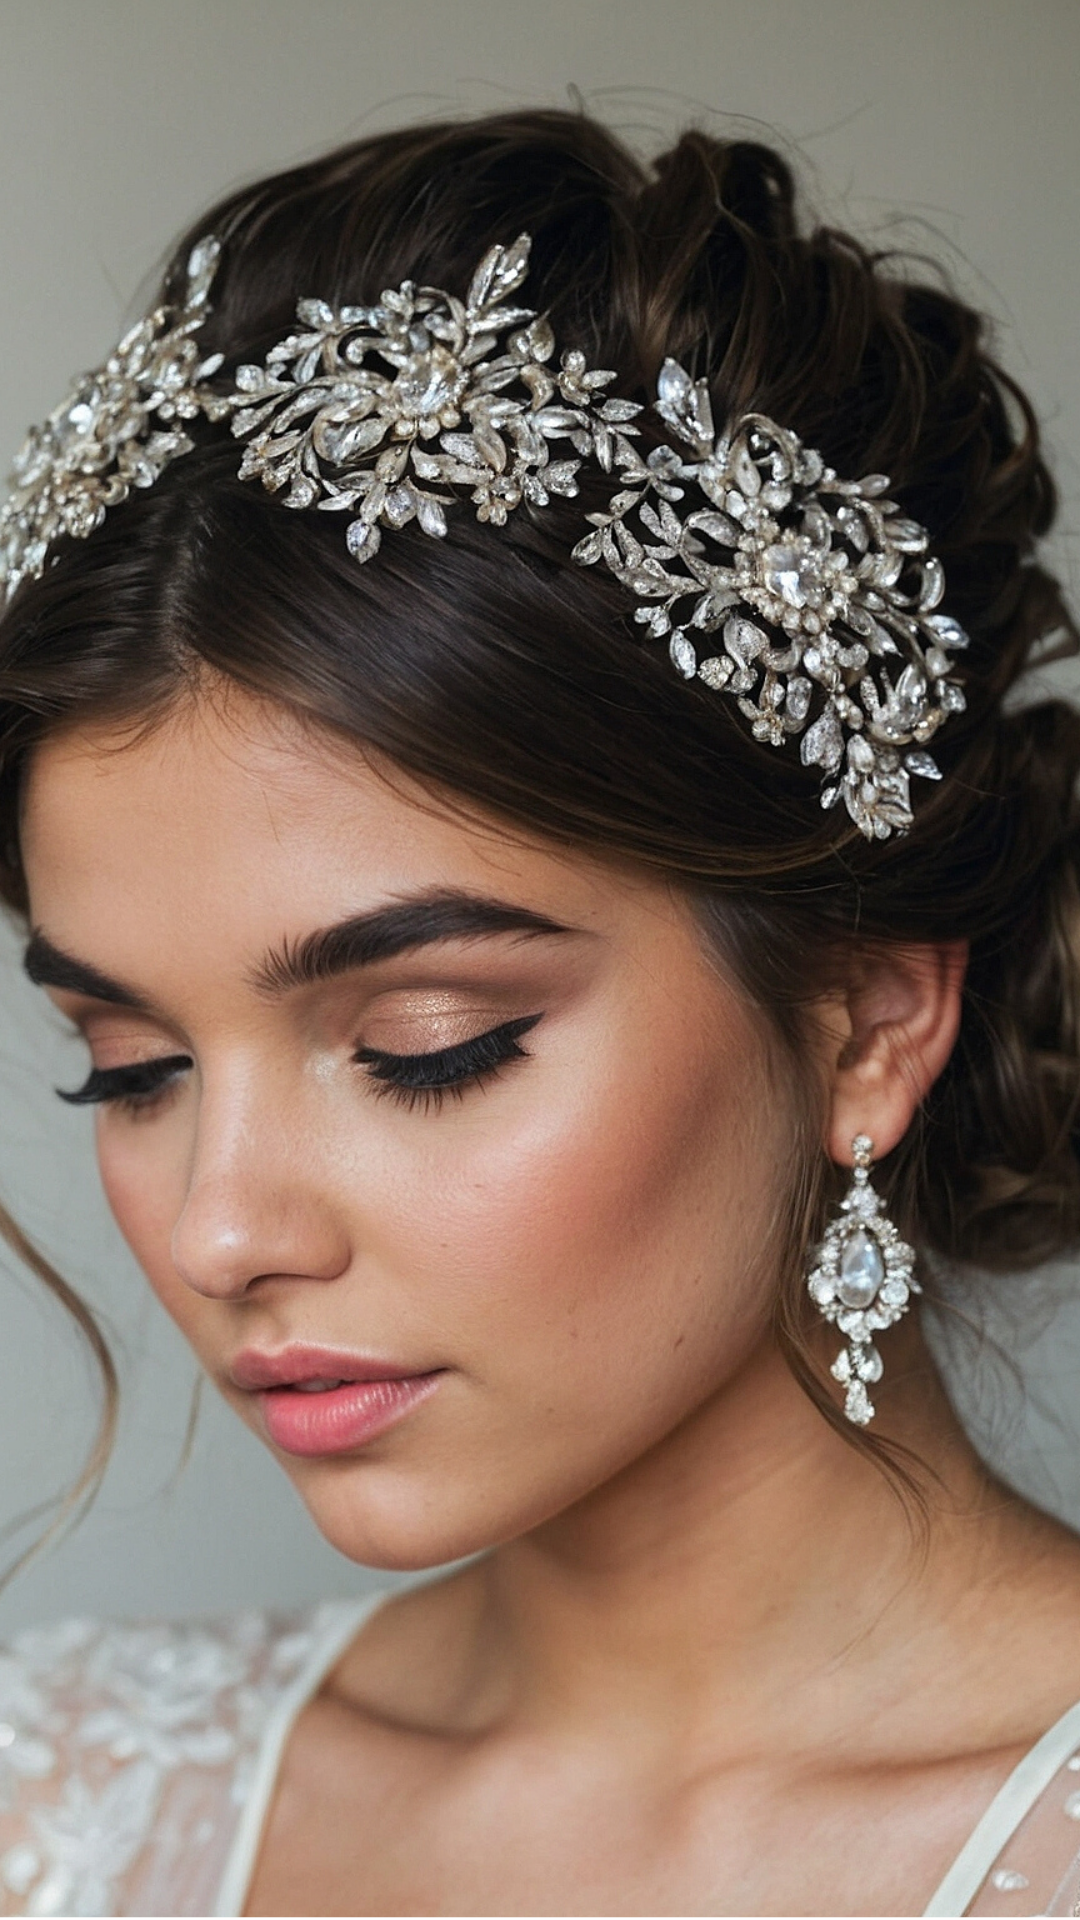 Sophisticated Bridal Updo with Crystal Tiara